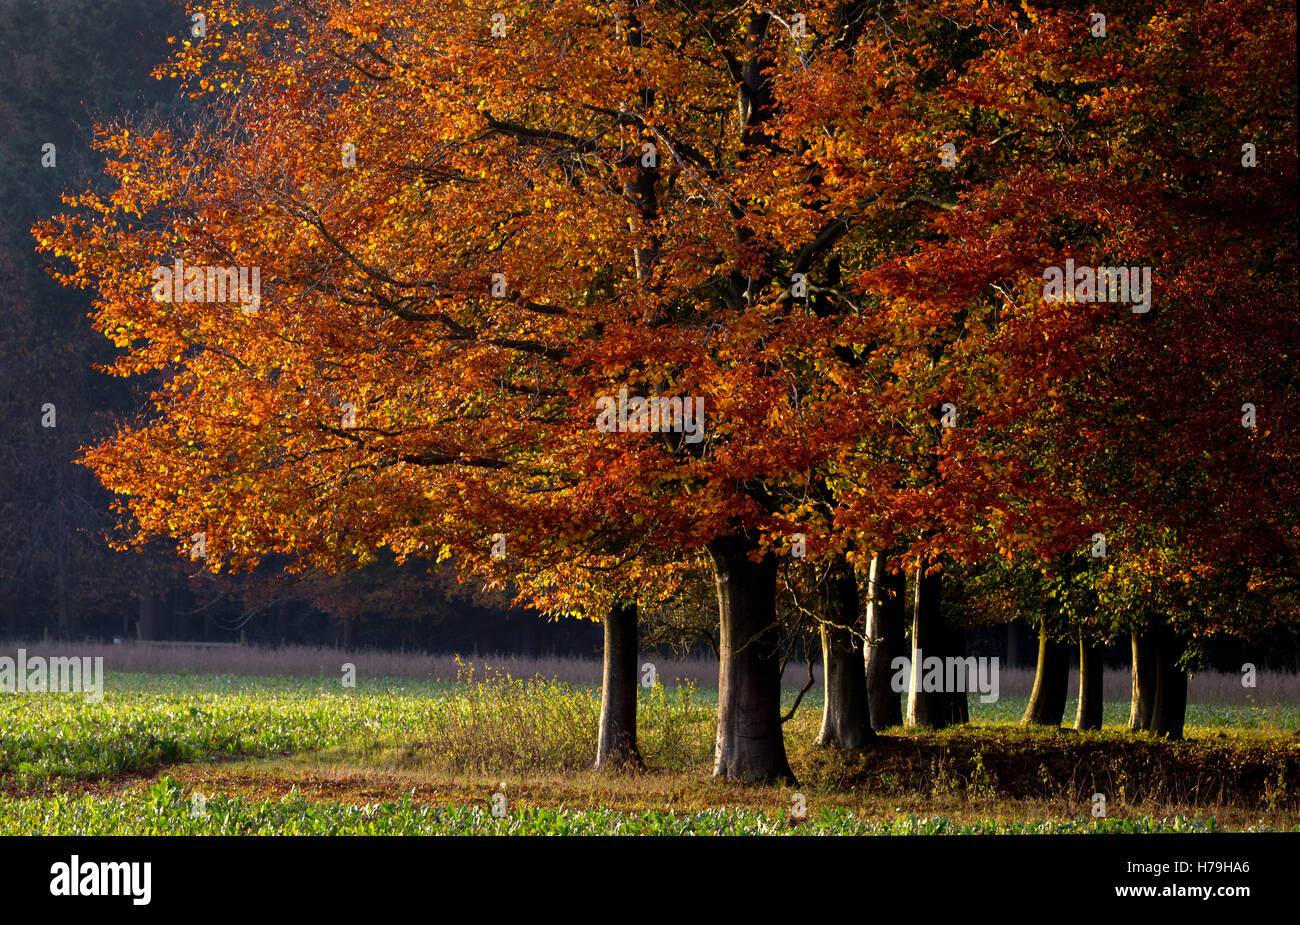 copse of beech trees in Autumn Colour,Oxfordshire,England Stock Photo